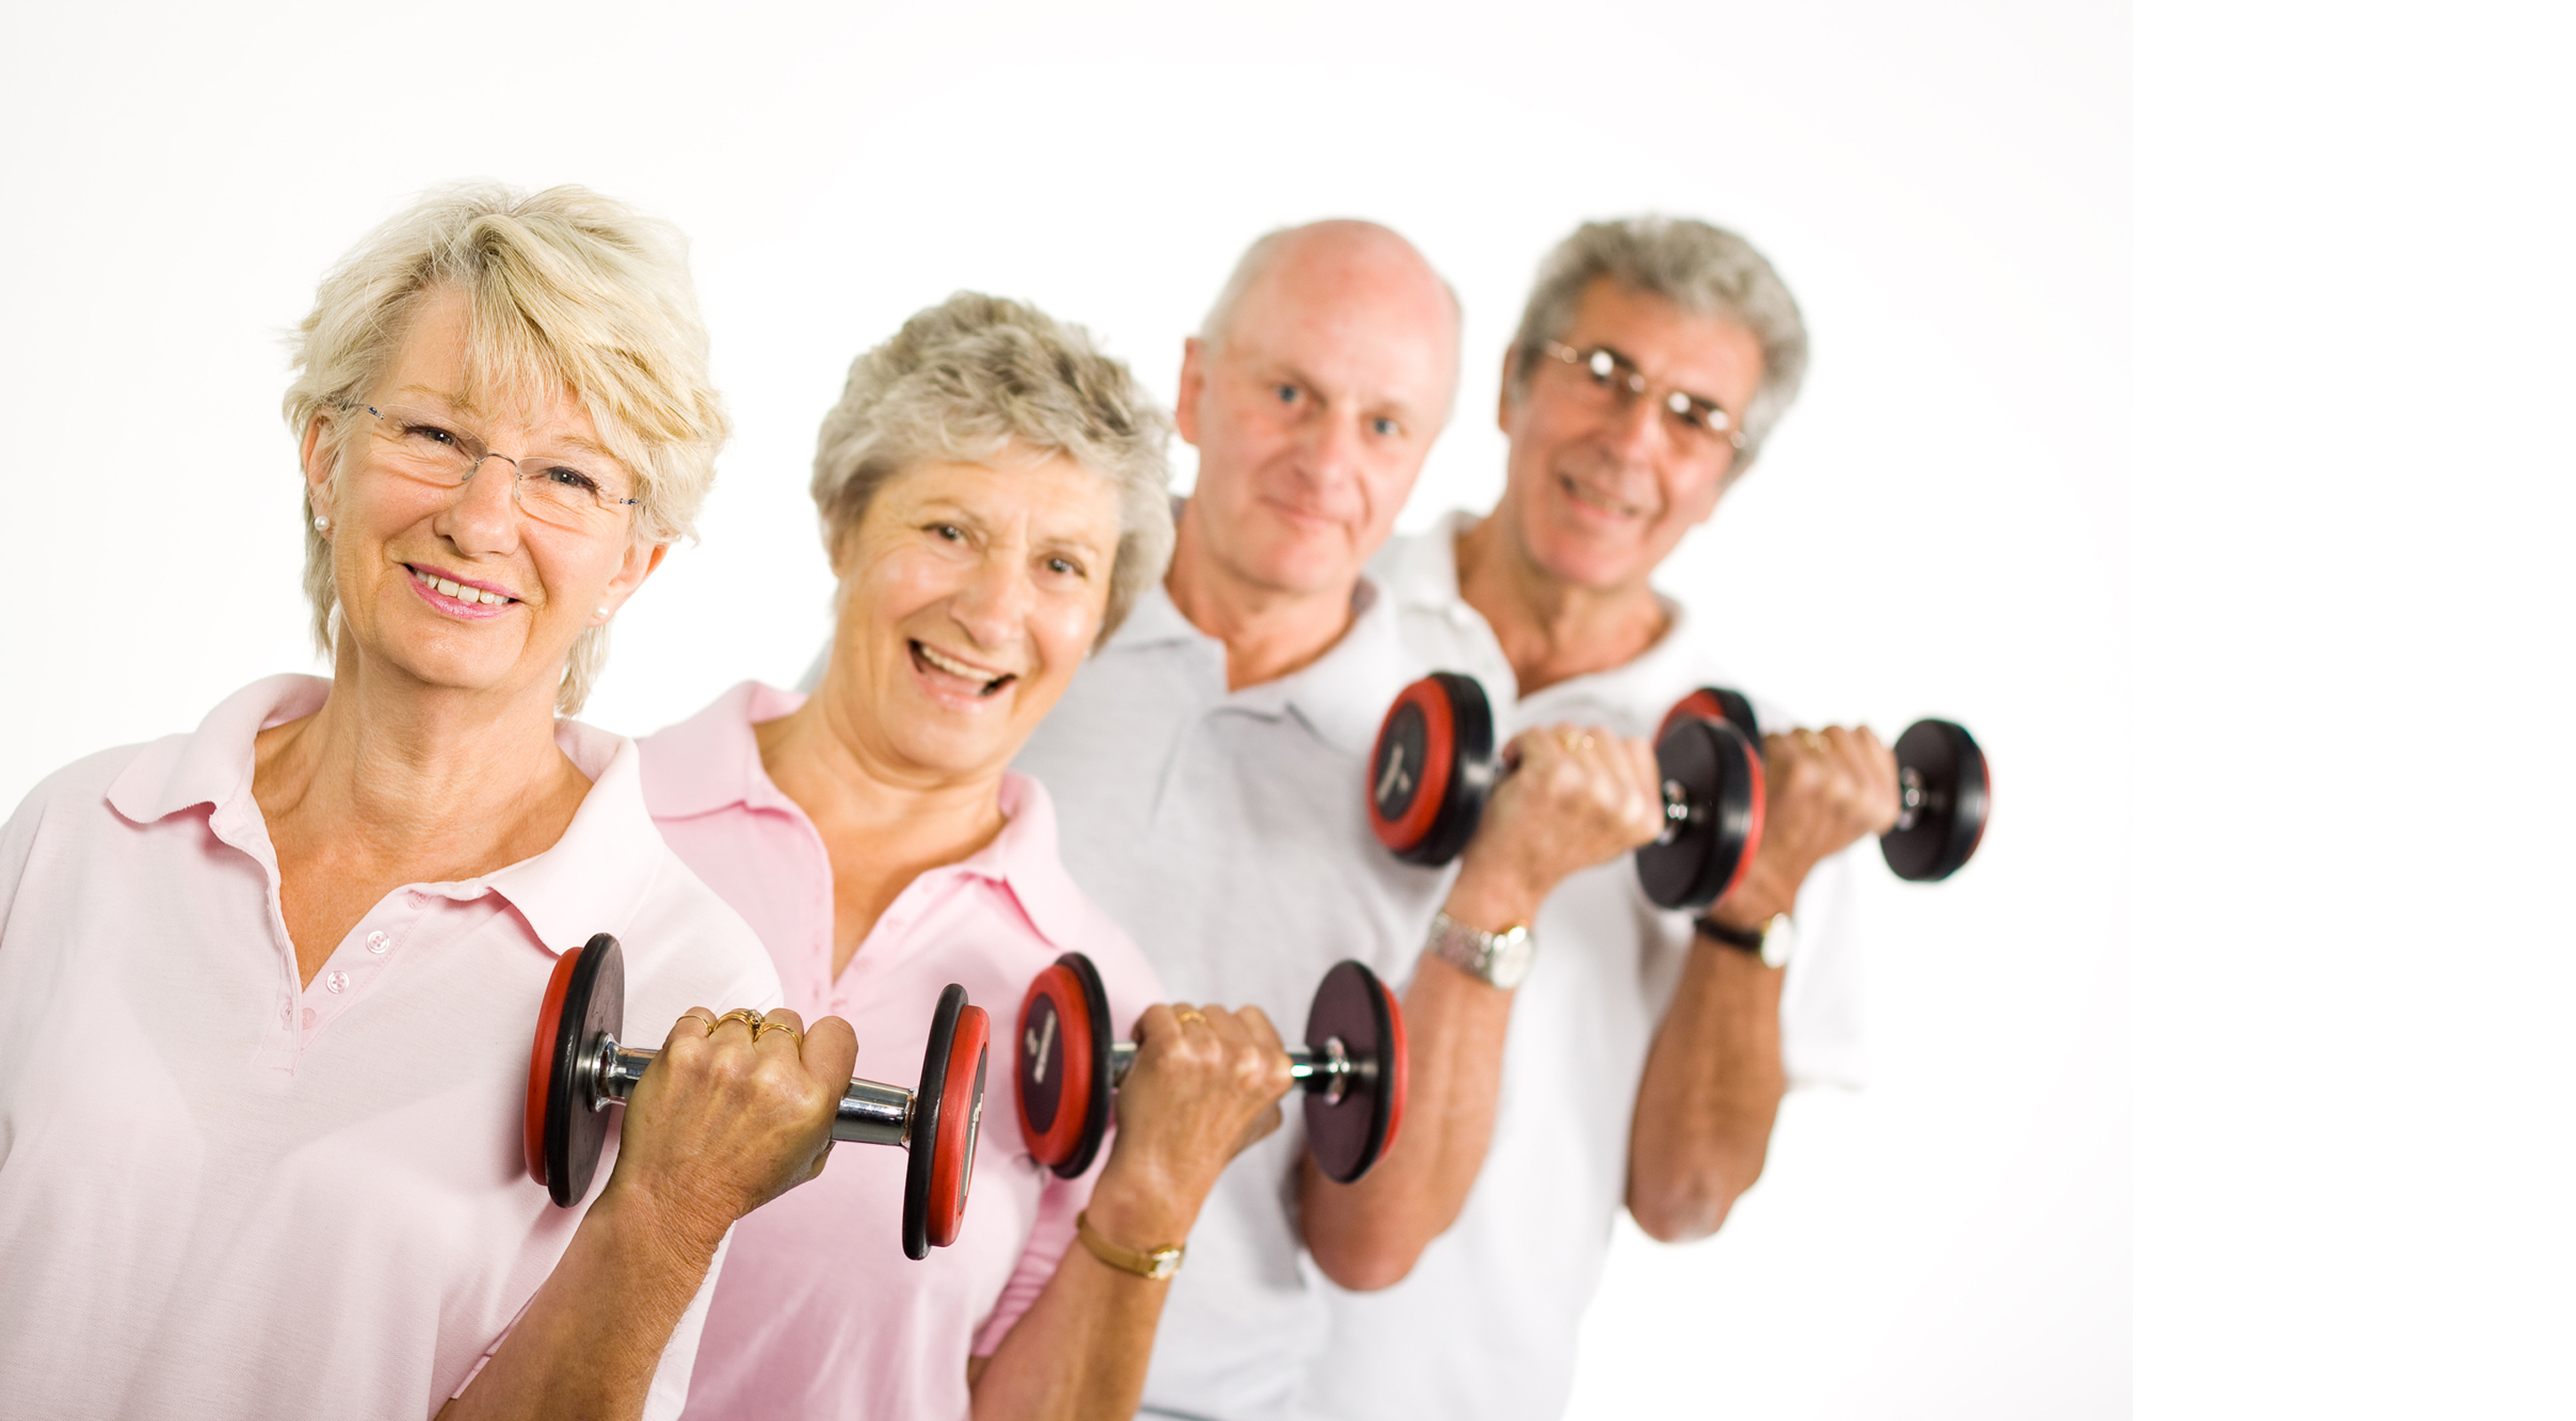 beneficial Minster exercise for osteoporosis